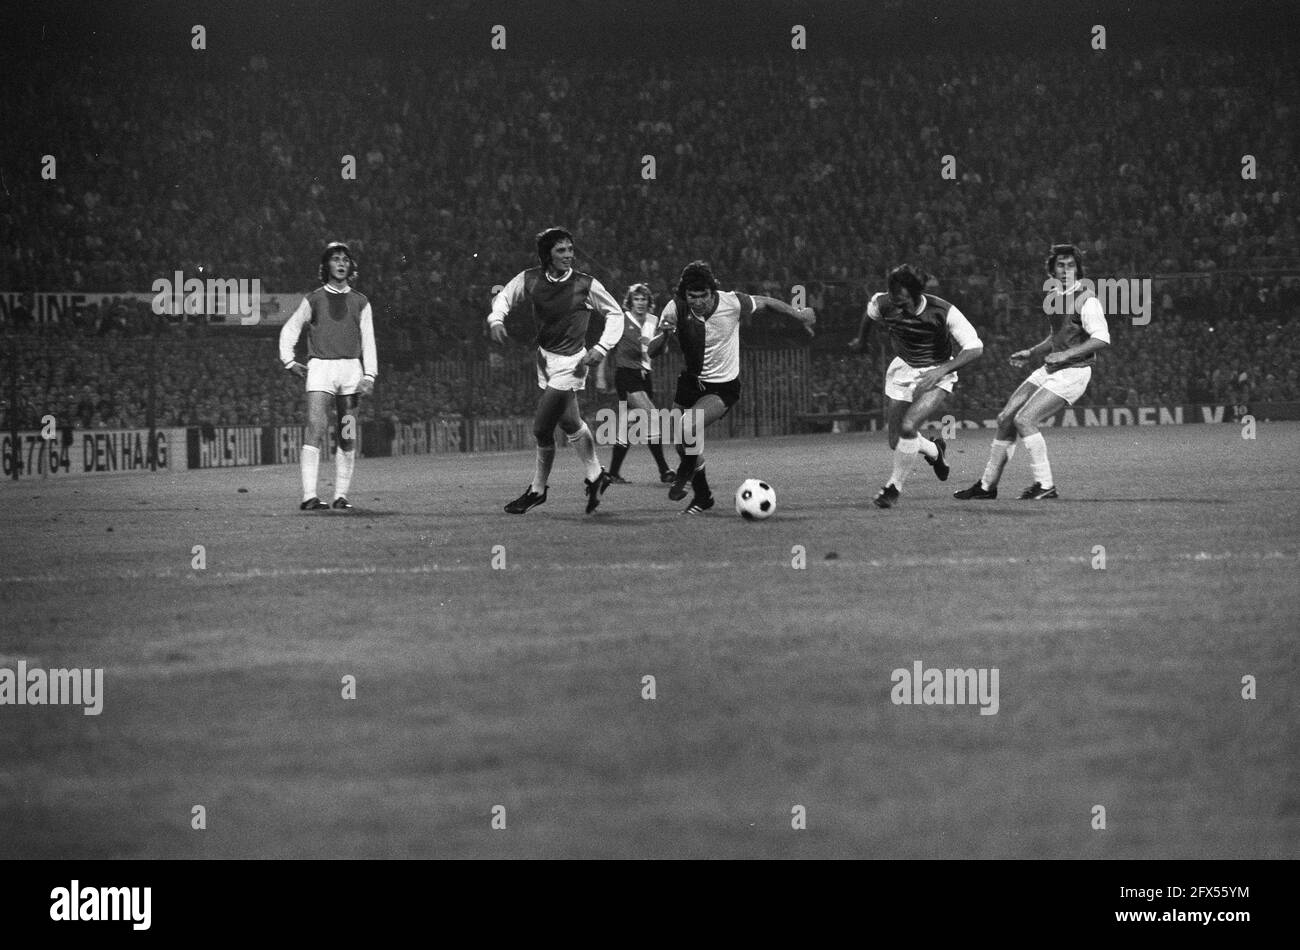 Feyenoord vs PSV 1-1, Van Hanegem in action, left Dijkers and right Pleun Strik, 15 September 1973, sports, soccer, The Netherlands, 20th century press agency photo, news to remember, documentary, historic photography 1945-1990, visual stories, human history of the Twentieth Century, capturing moments in time Stock Photo